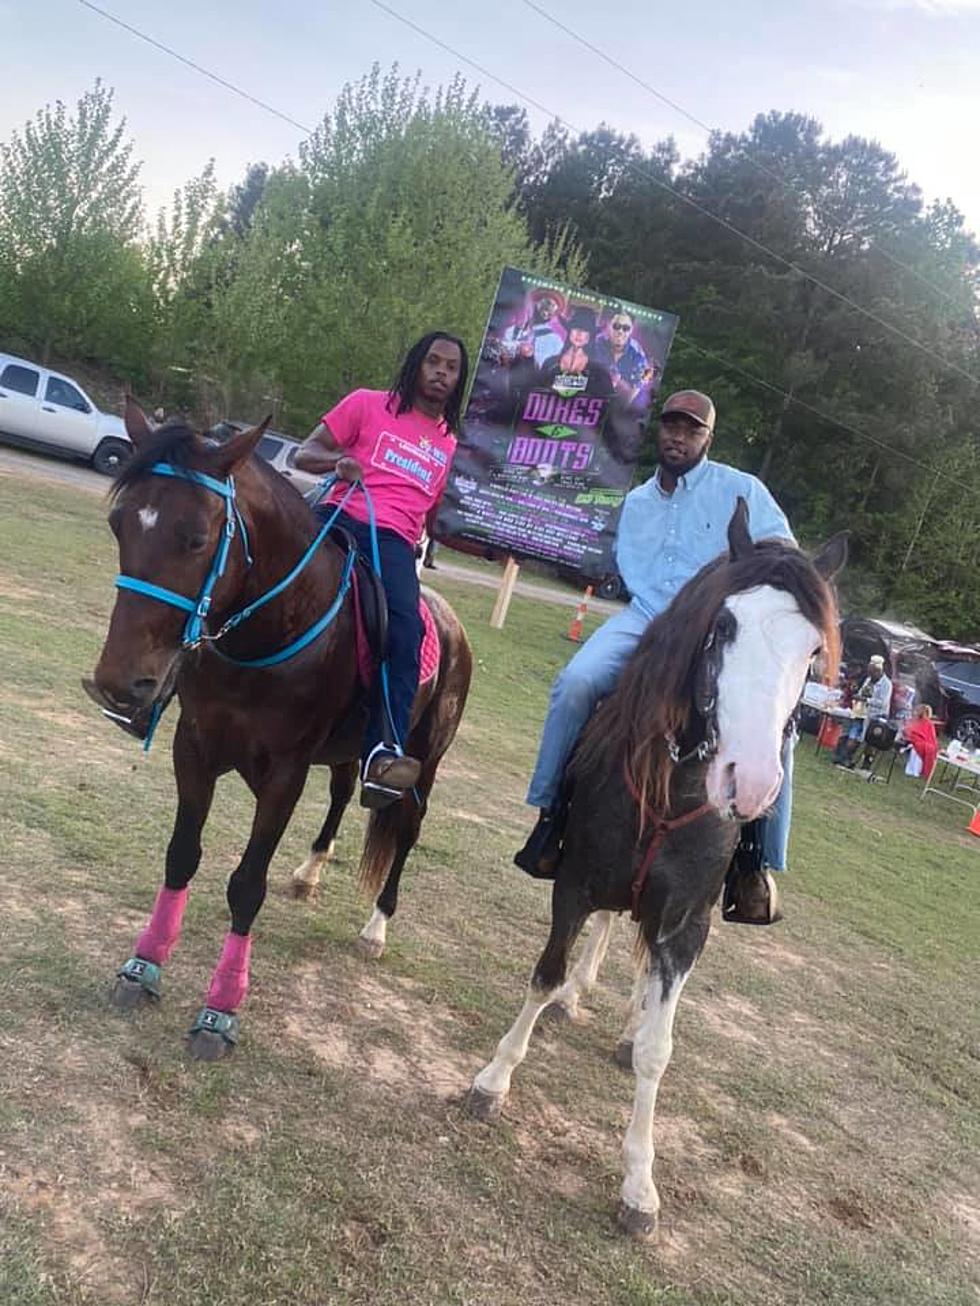 Bossier Leaders to File Suit to Stop Weekend Trail Ride Event